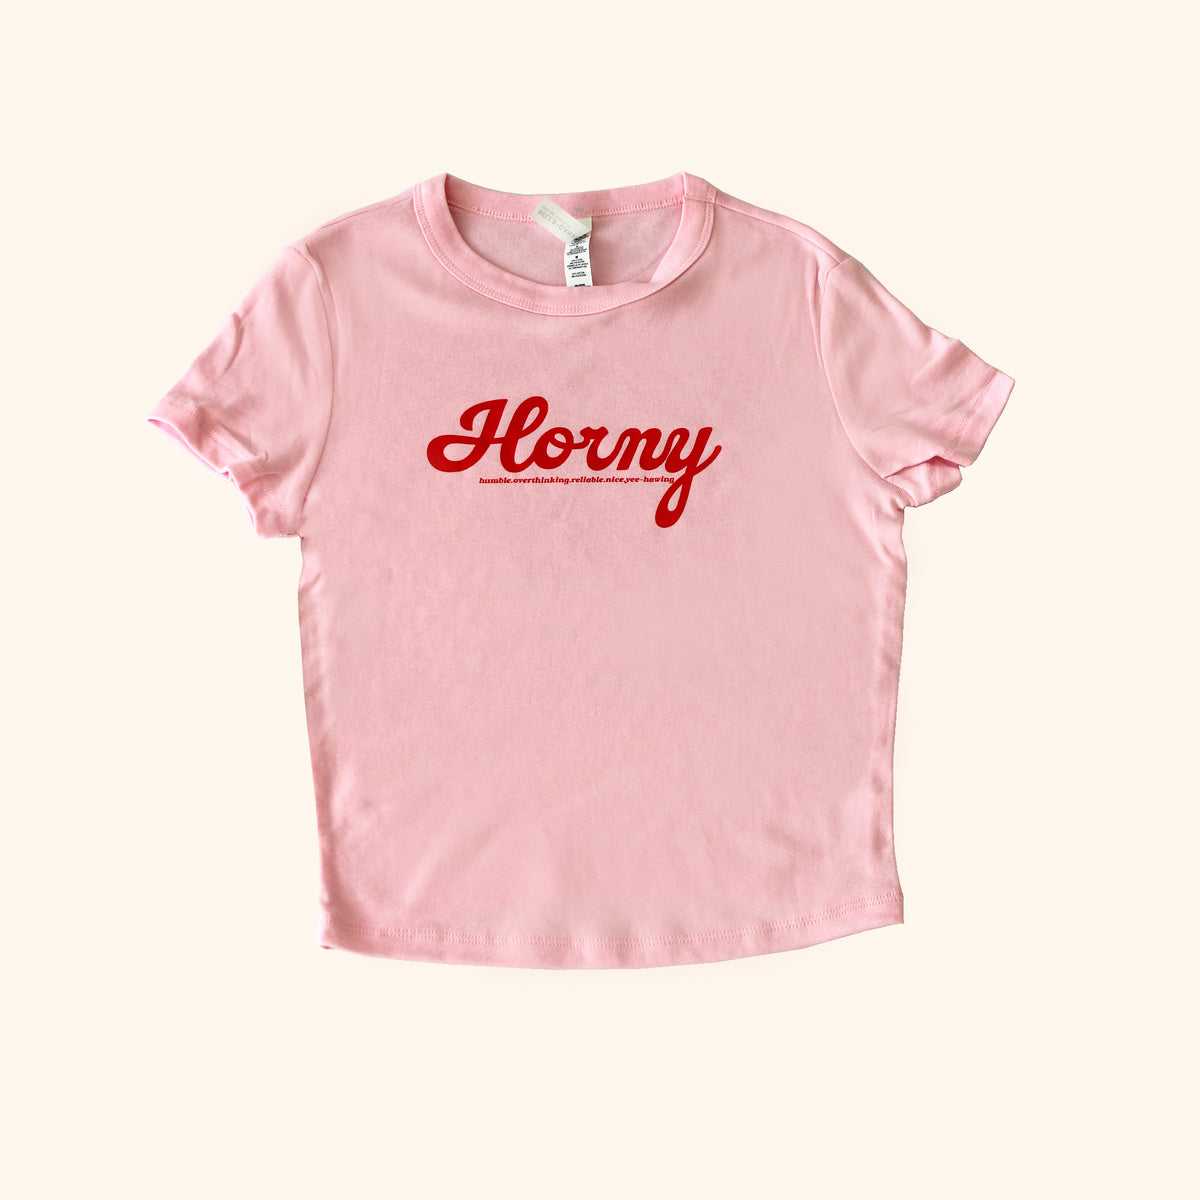 Y2K HORNY Baby Tee | Pink T-Shirt + Red Graphic